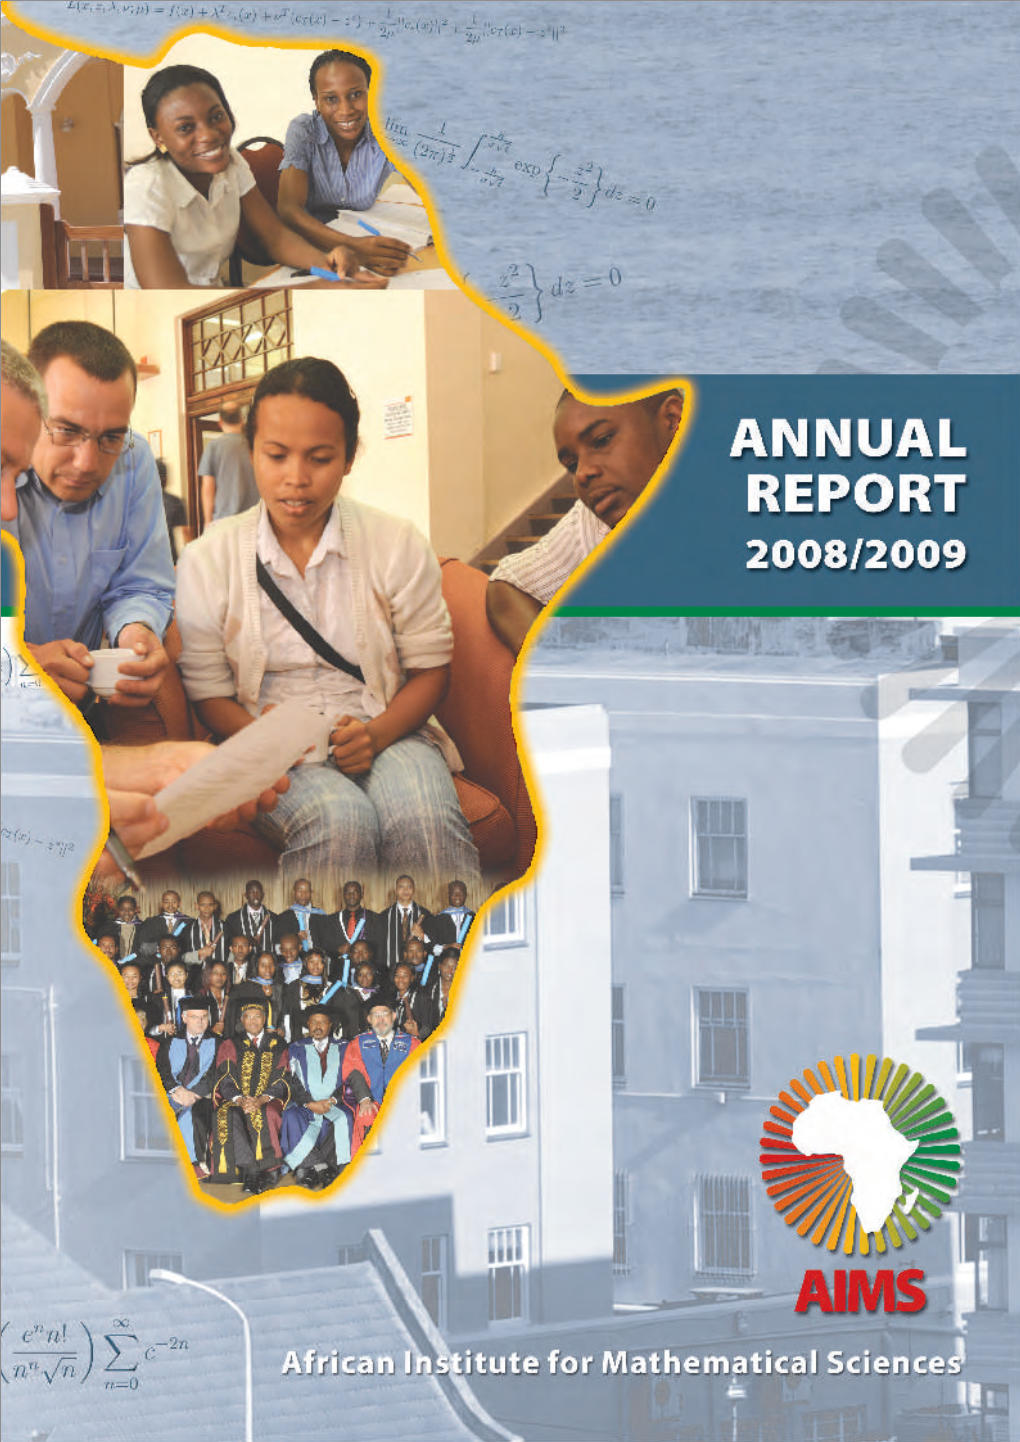 2009 Annual Report INNERS.Cdr